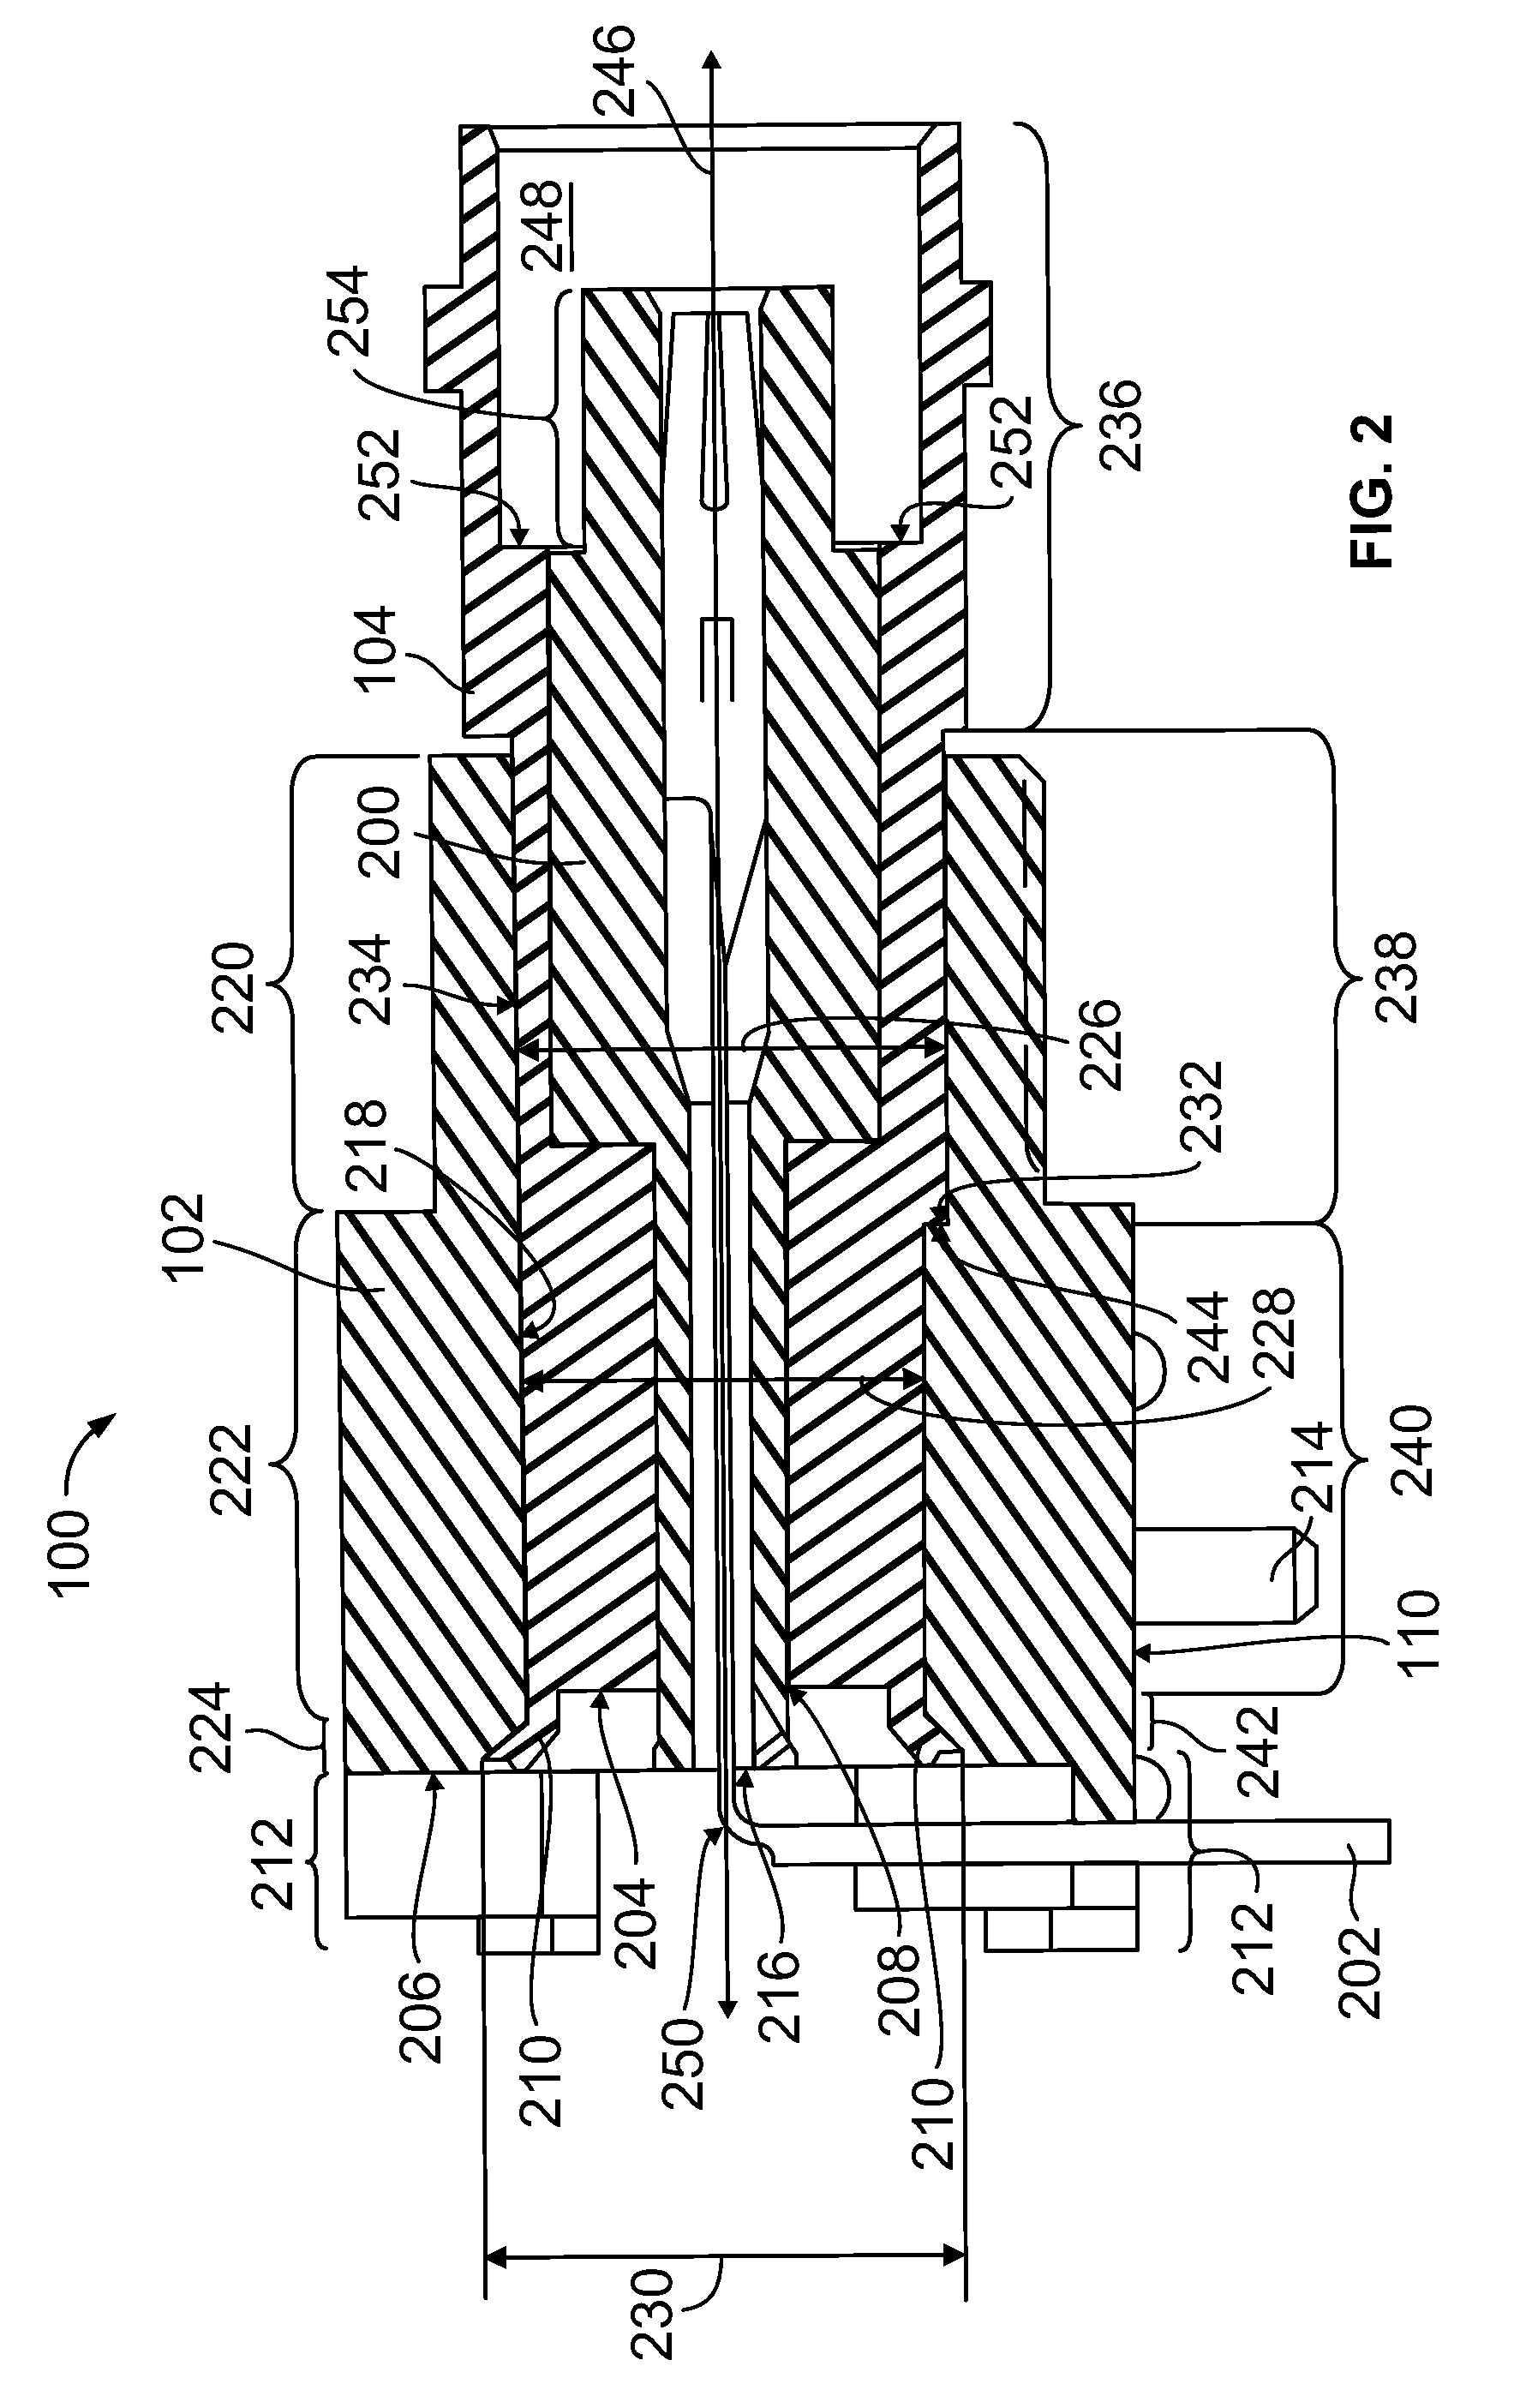 Electrical connector with slotted shield